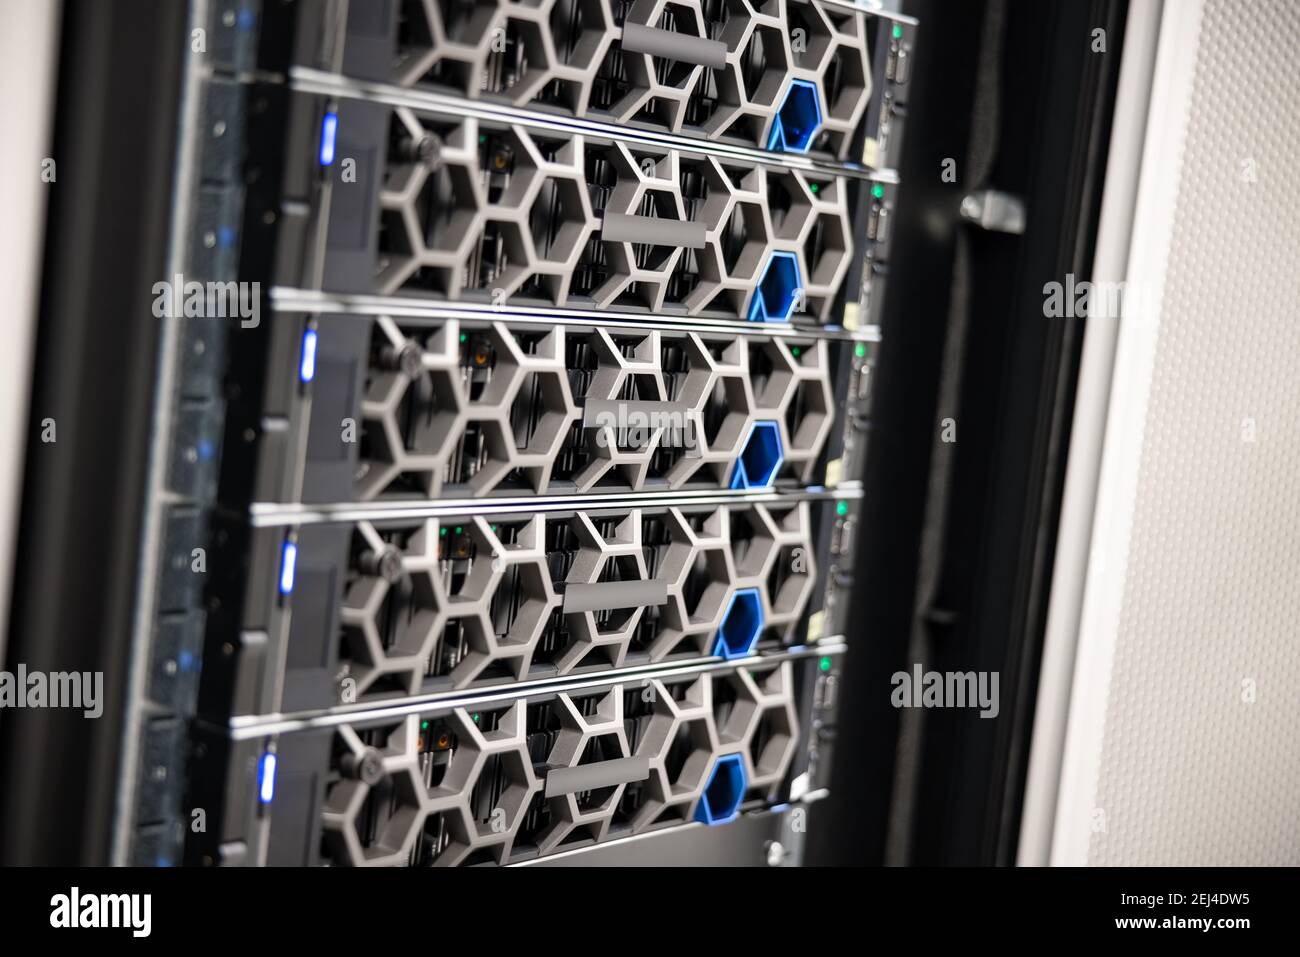 Server Hosts In a Hyperconverged Datacenter Environment Stock Photo